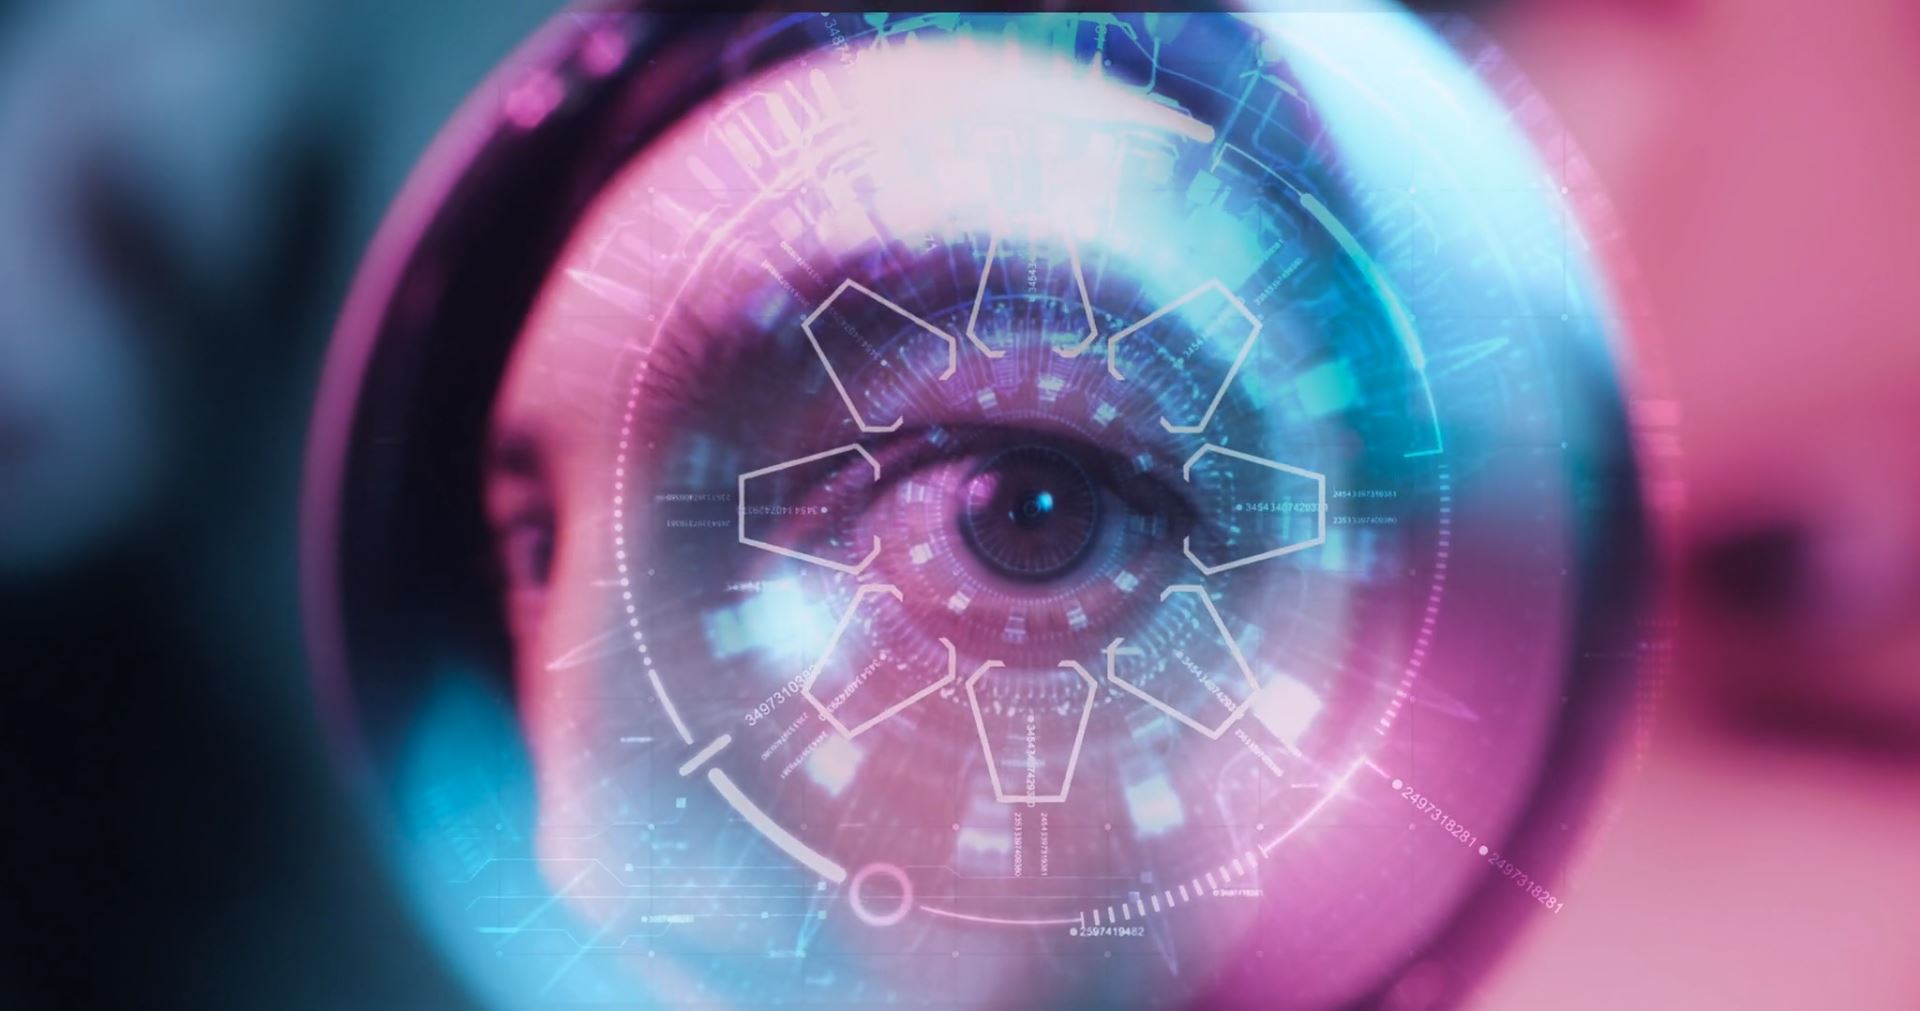 This image shows an eye looking at the camera surrounded by a lens with an animation overlay small